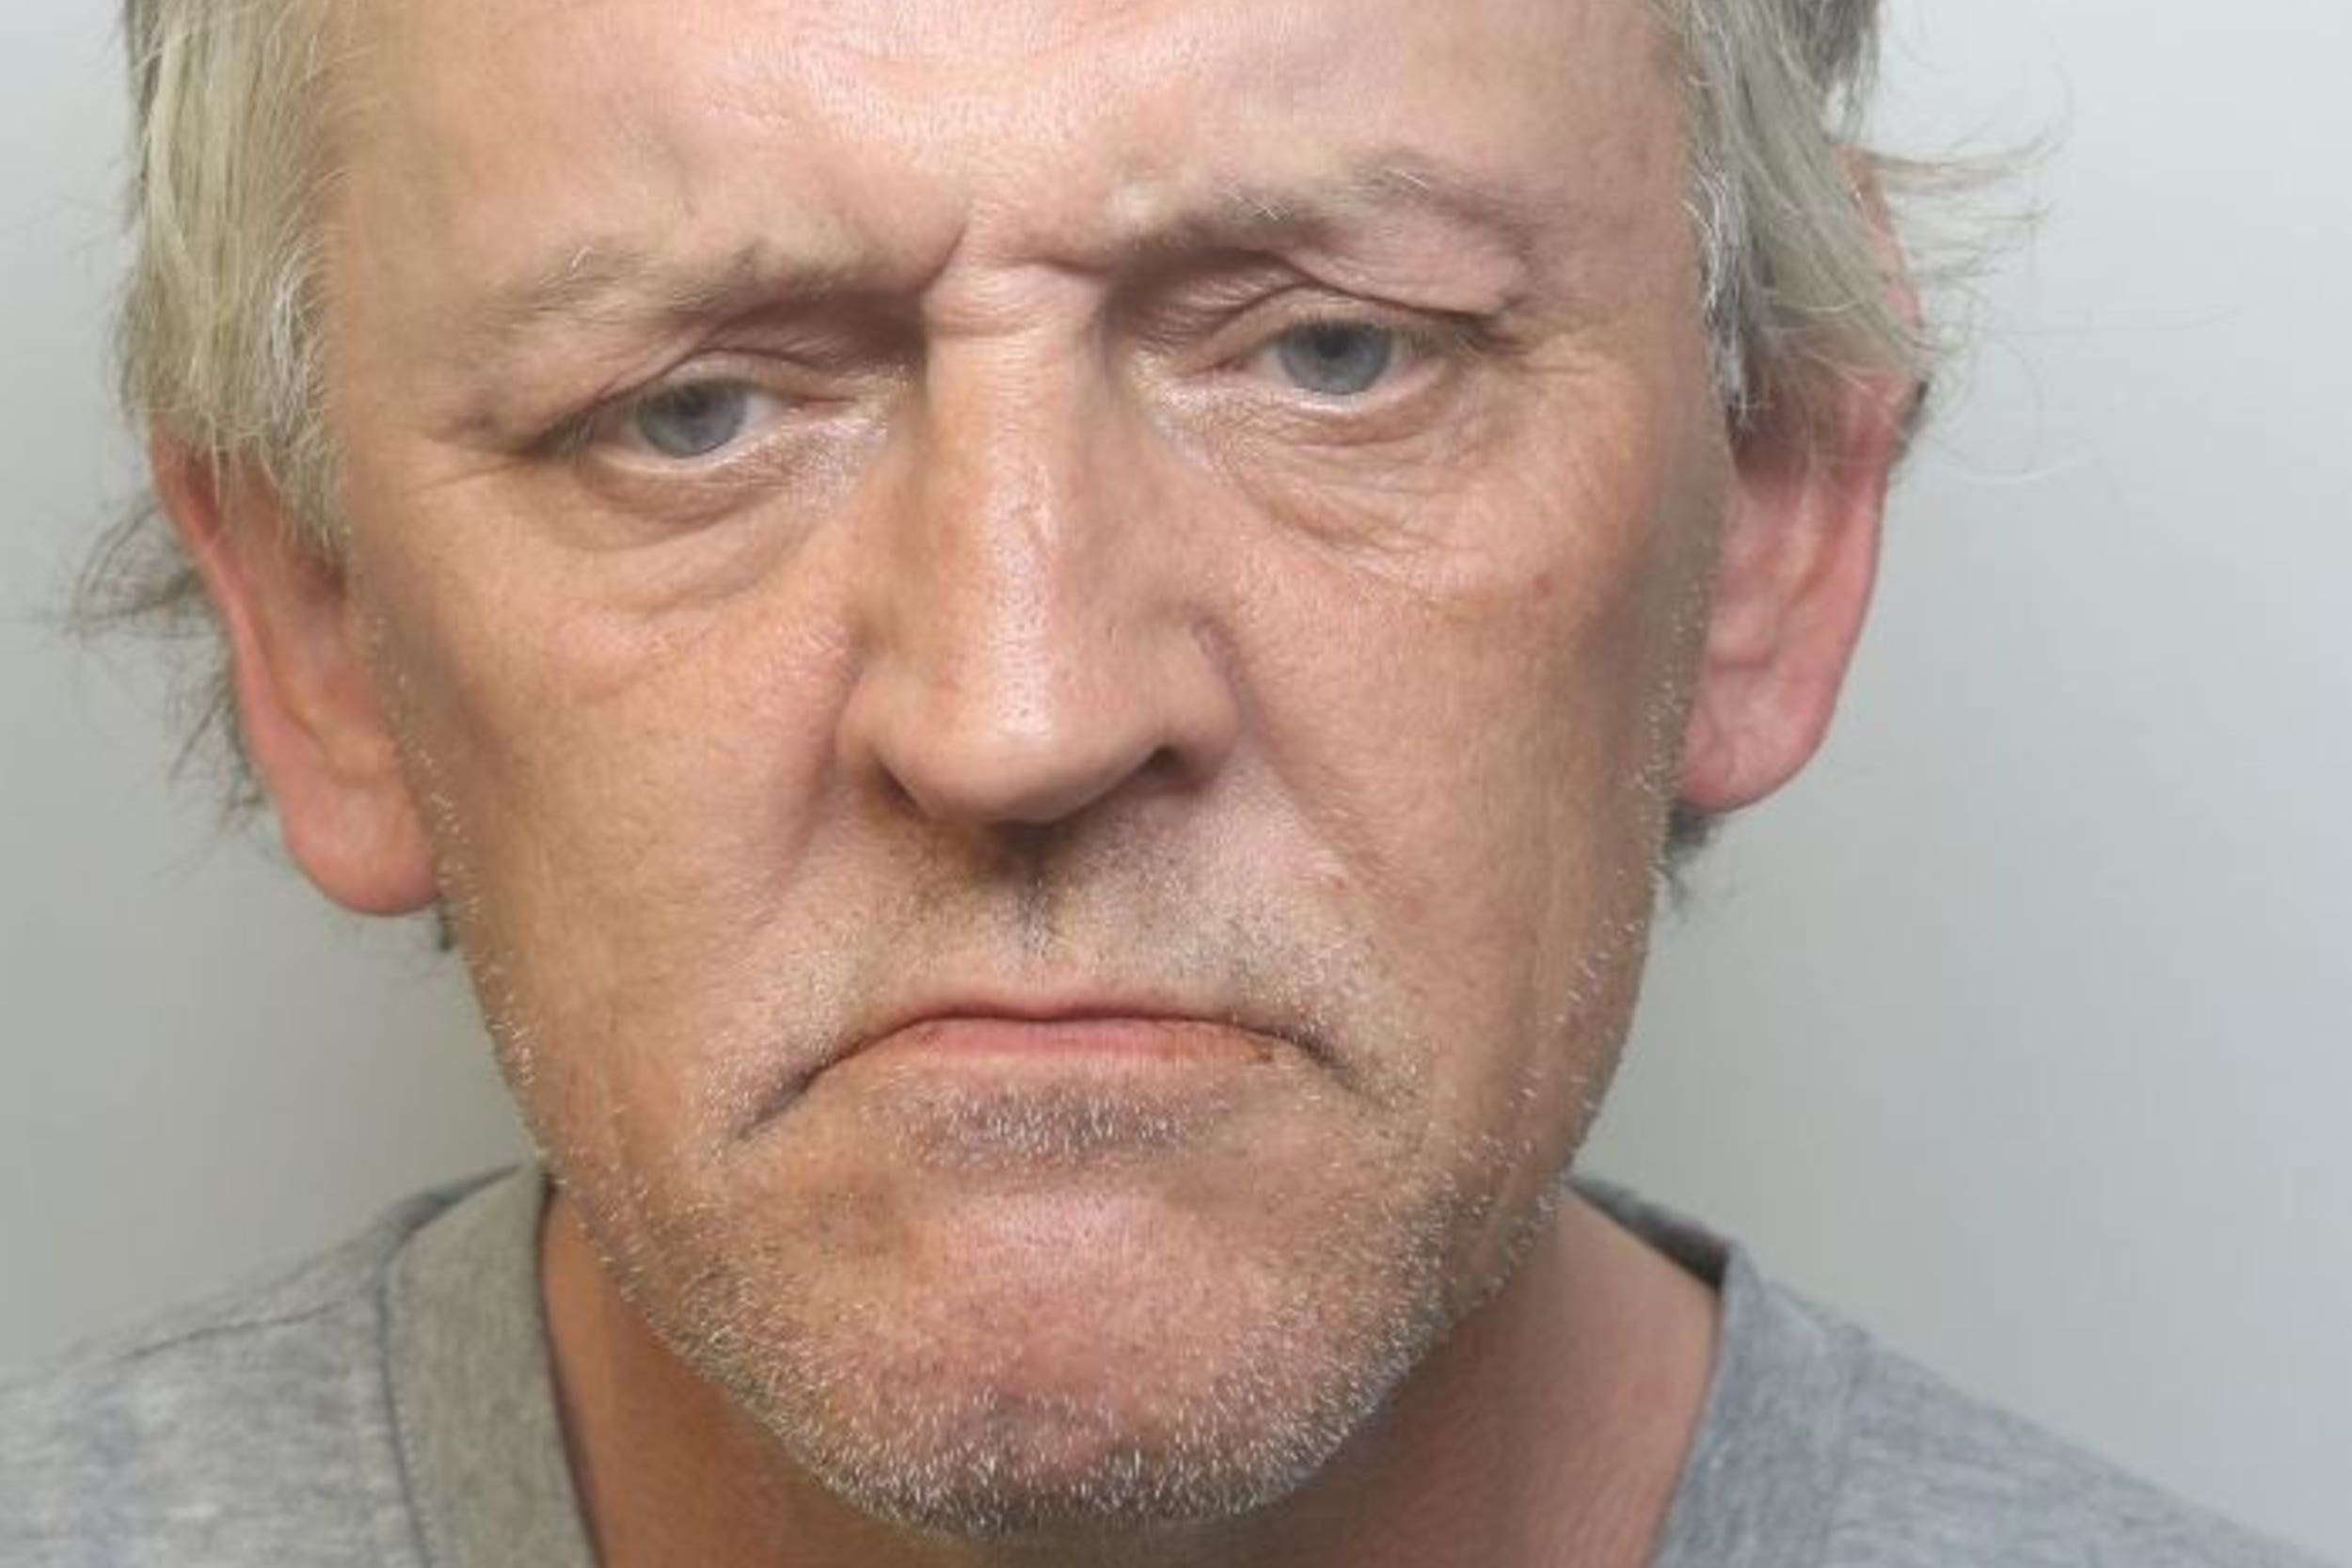 Steven Craig, 58, inflicted horrendous injuries on Jacqueline Kirk in a car park in Weston-super-Mare in April 1998